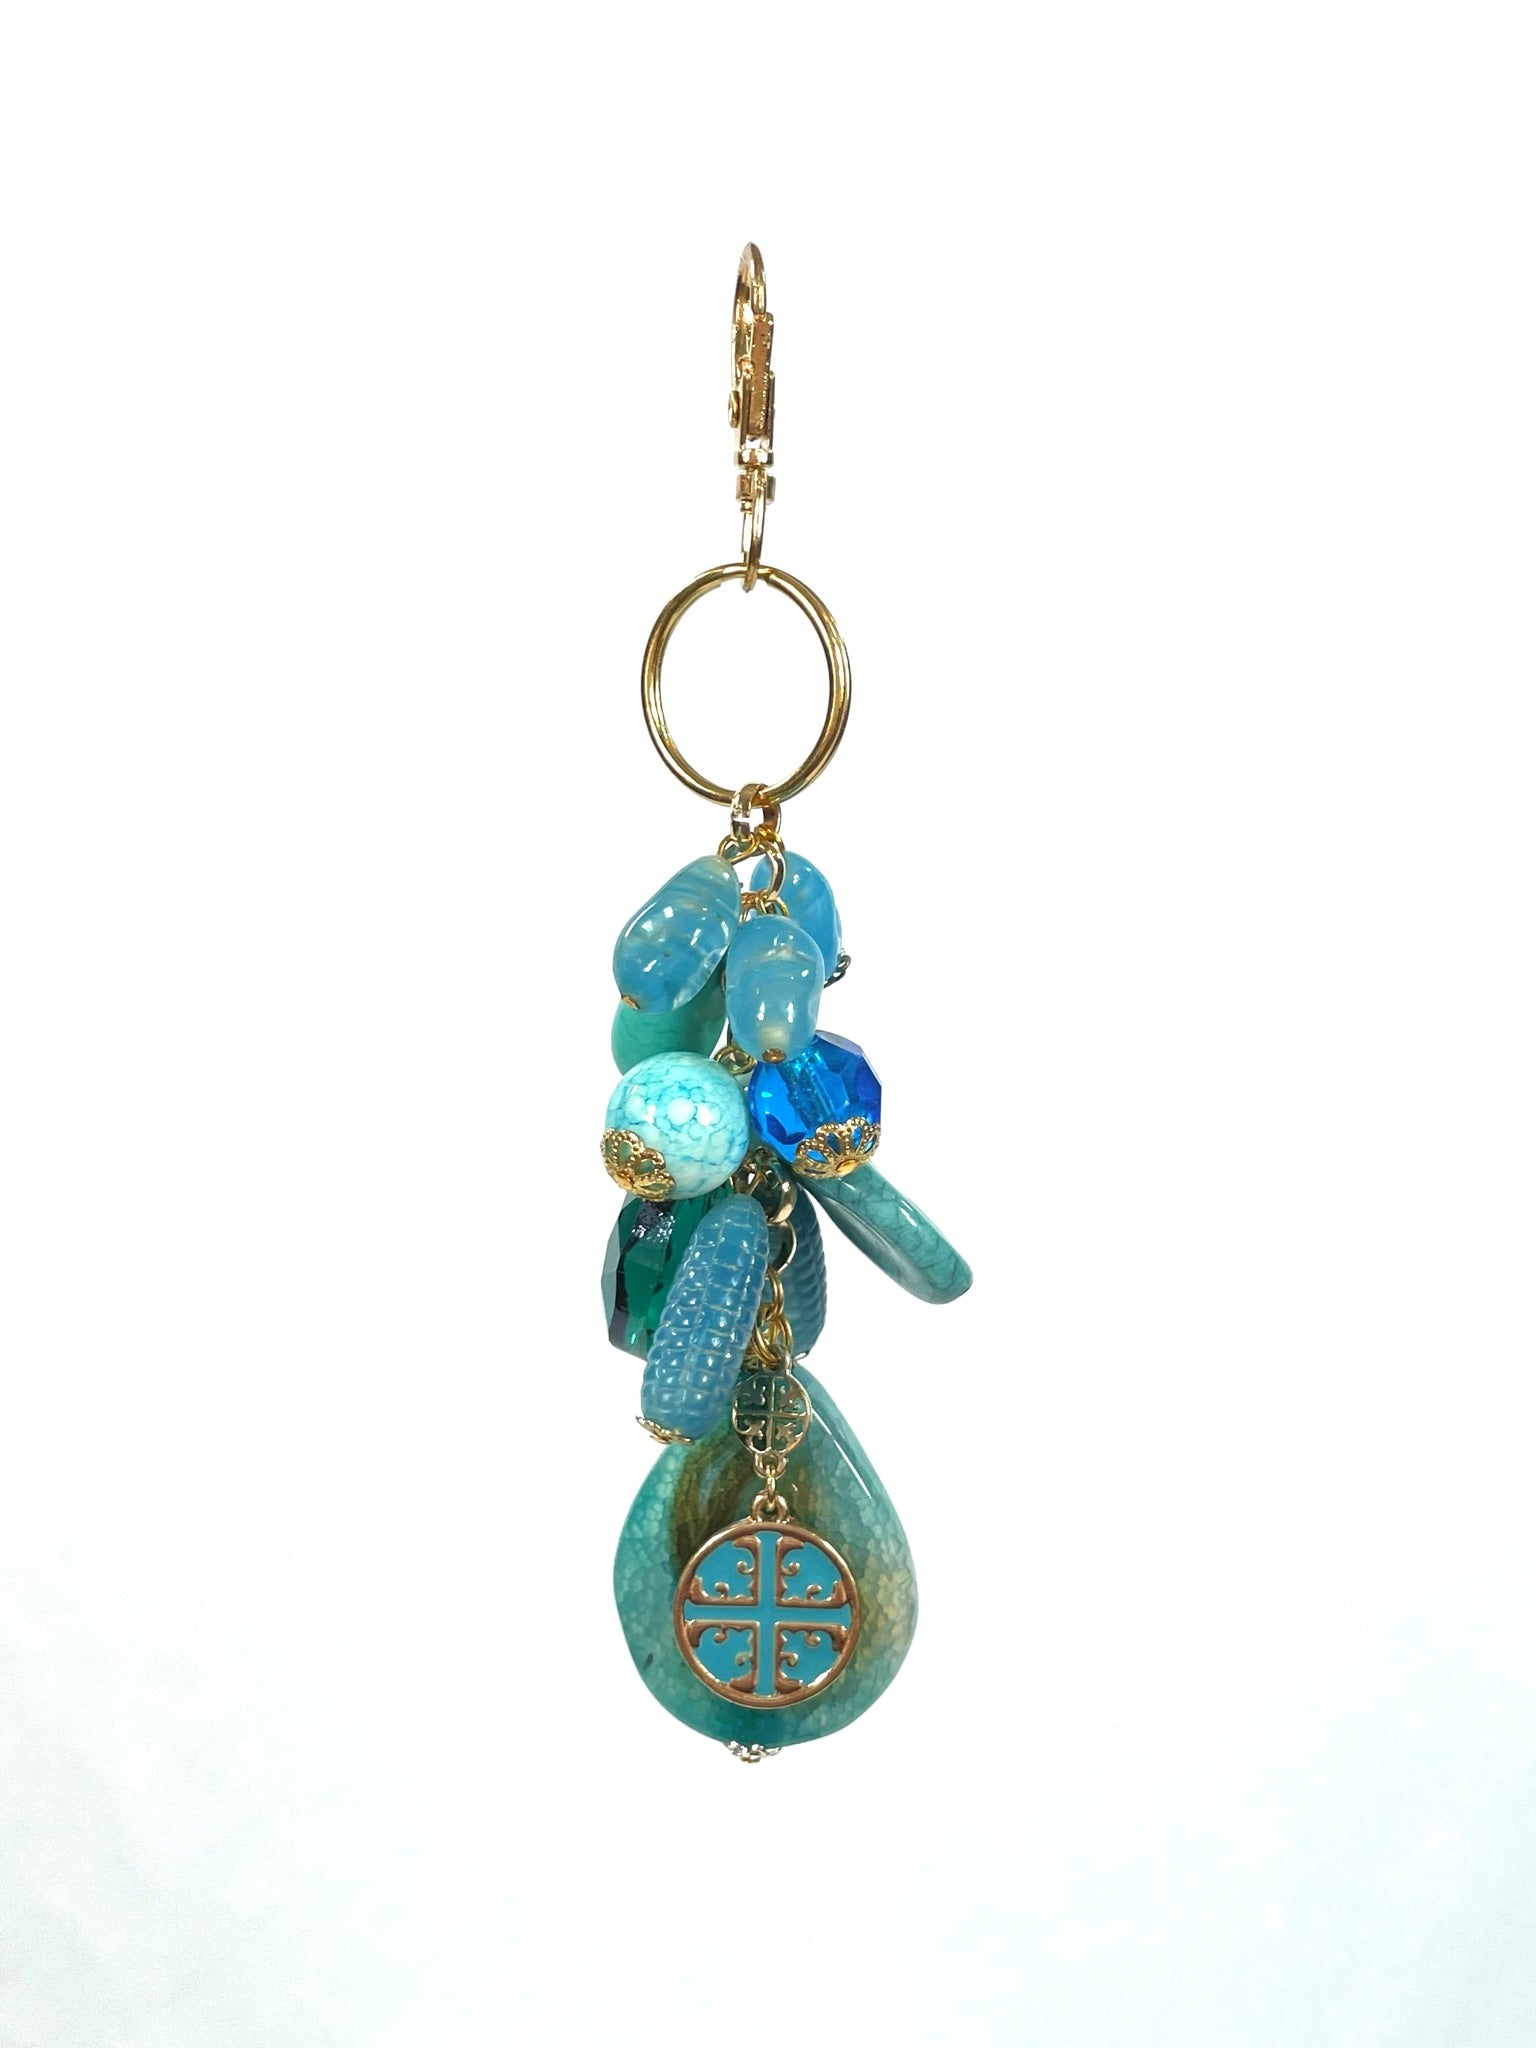 Turquoise 2 Keychain Purse Bling